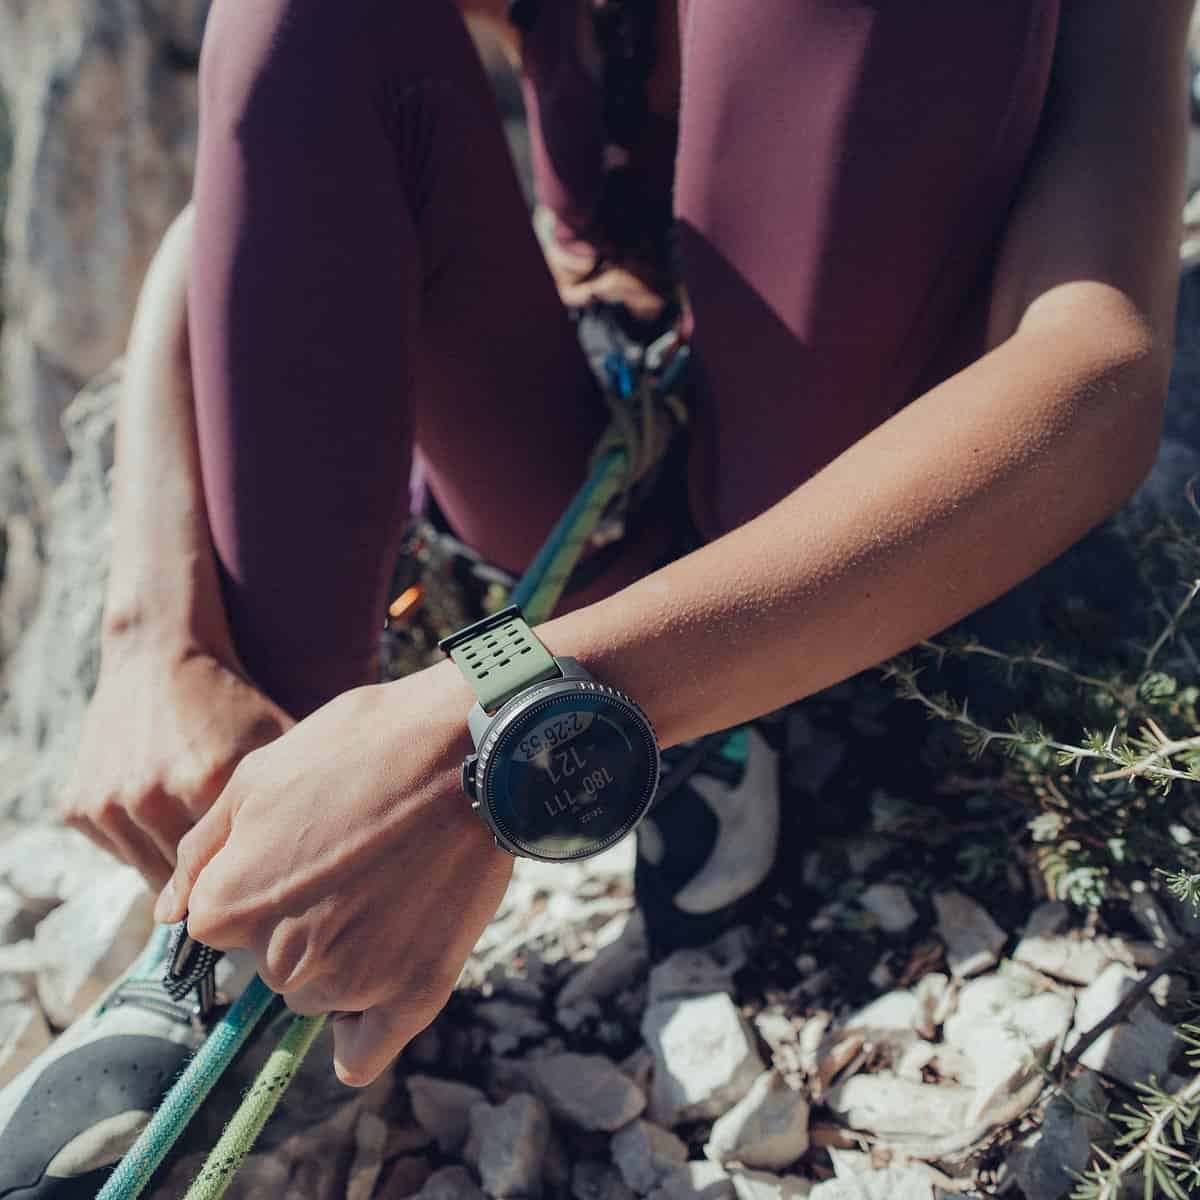 Suunto unveils the new Vertical GPS adventure watch featuring free offline maps, solar charging & unbeatable battery life